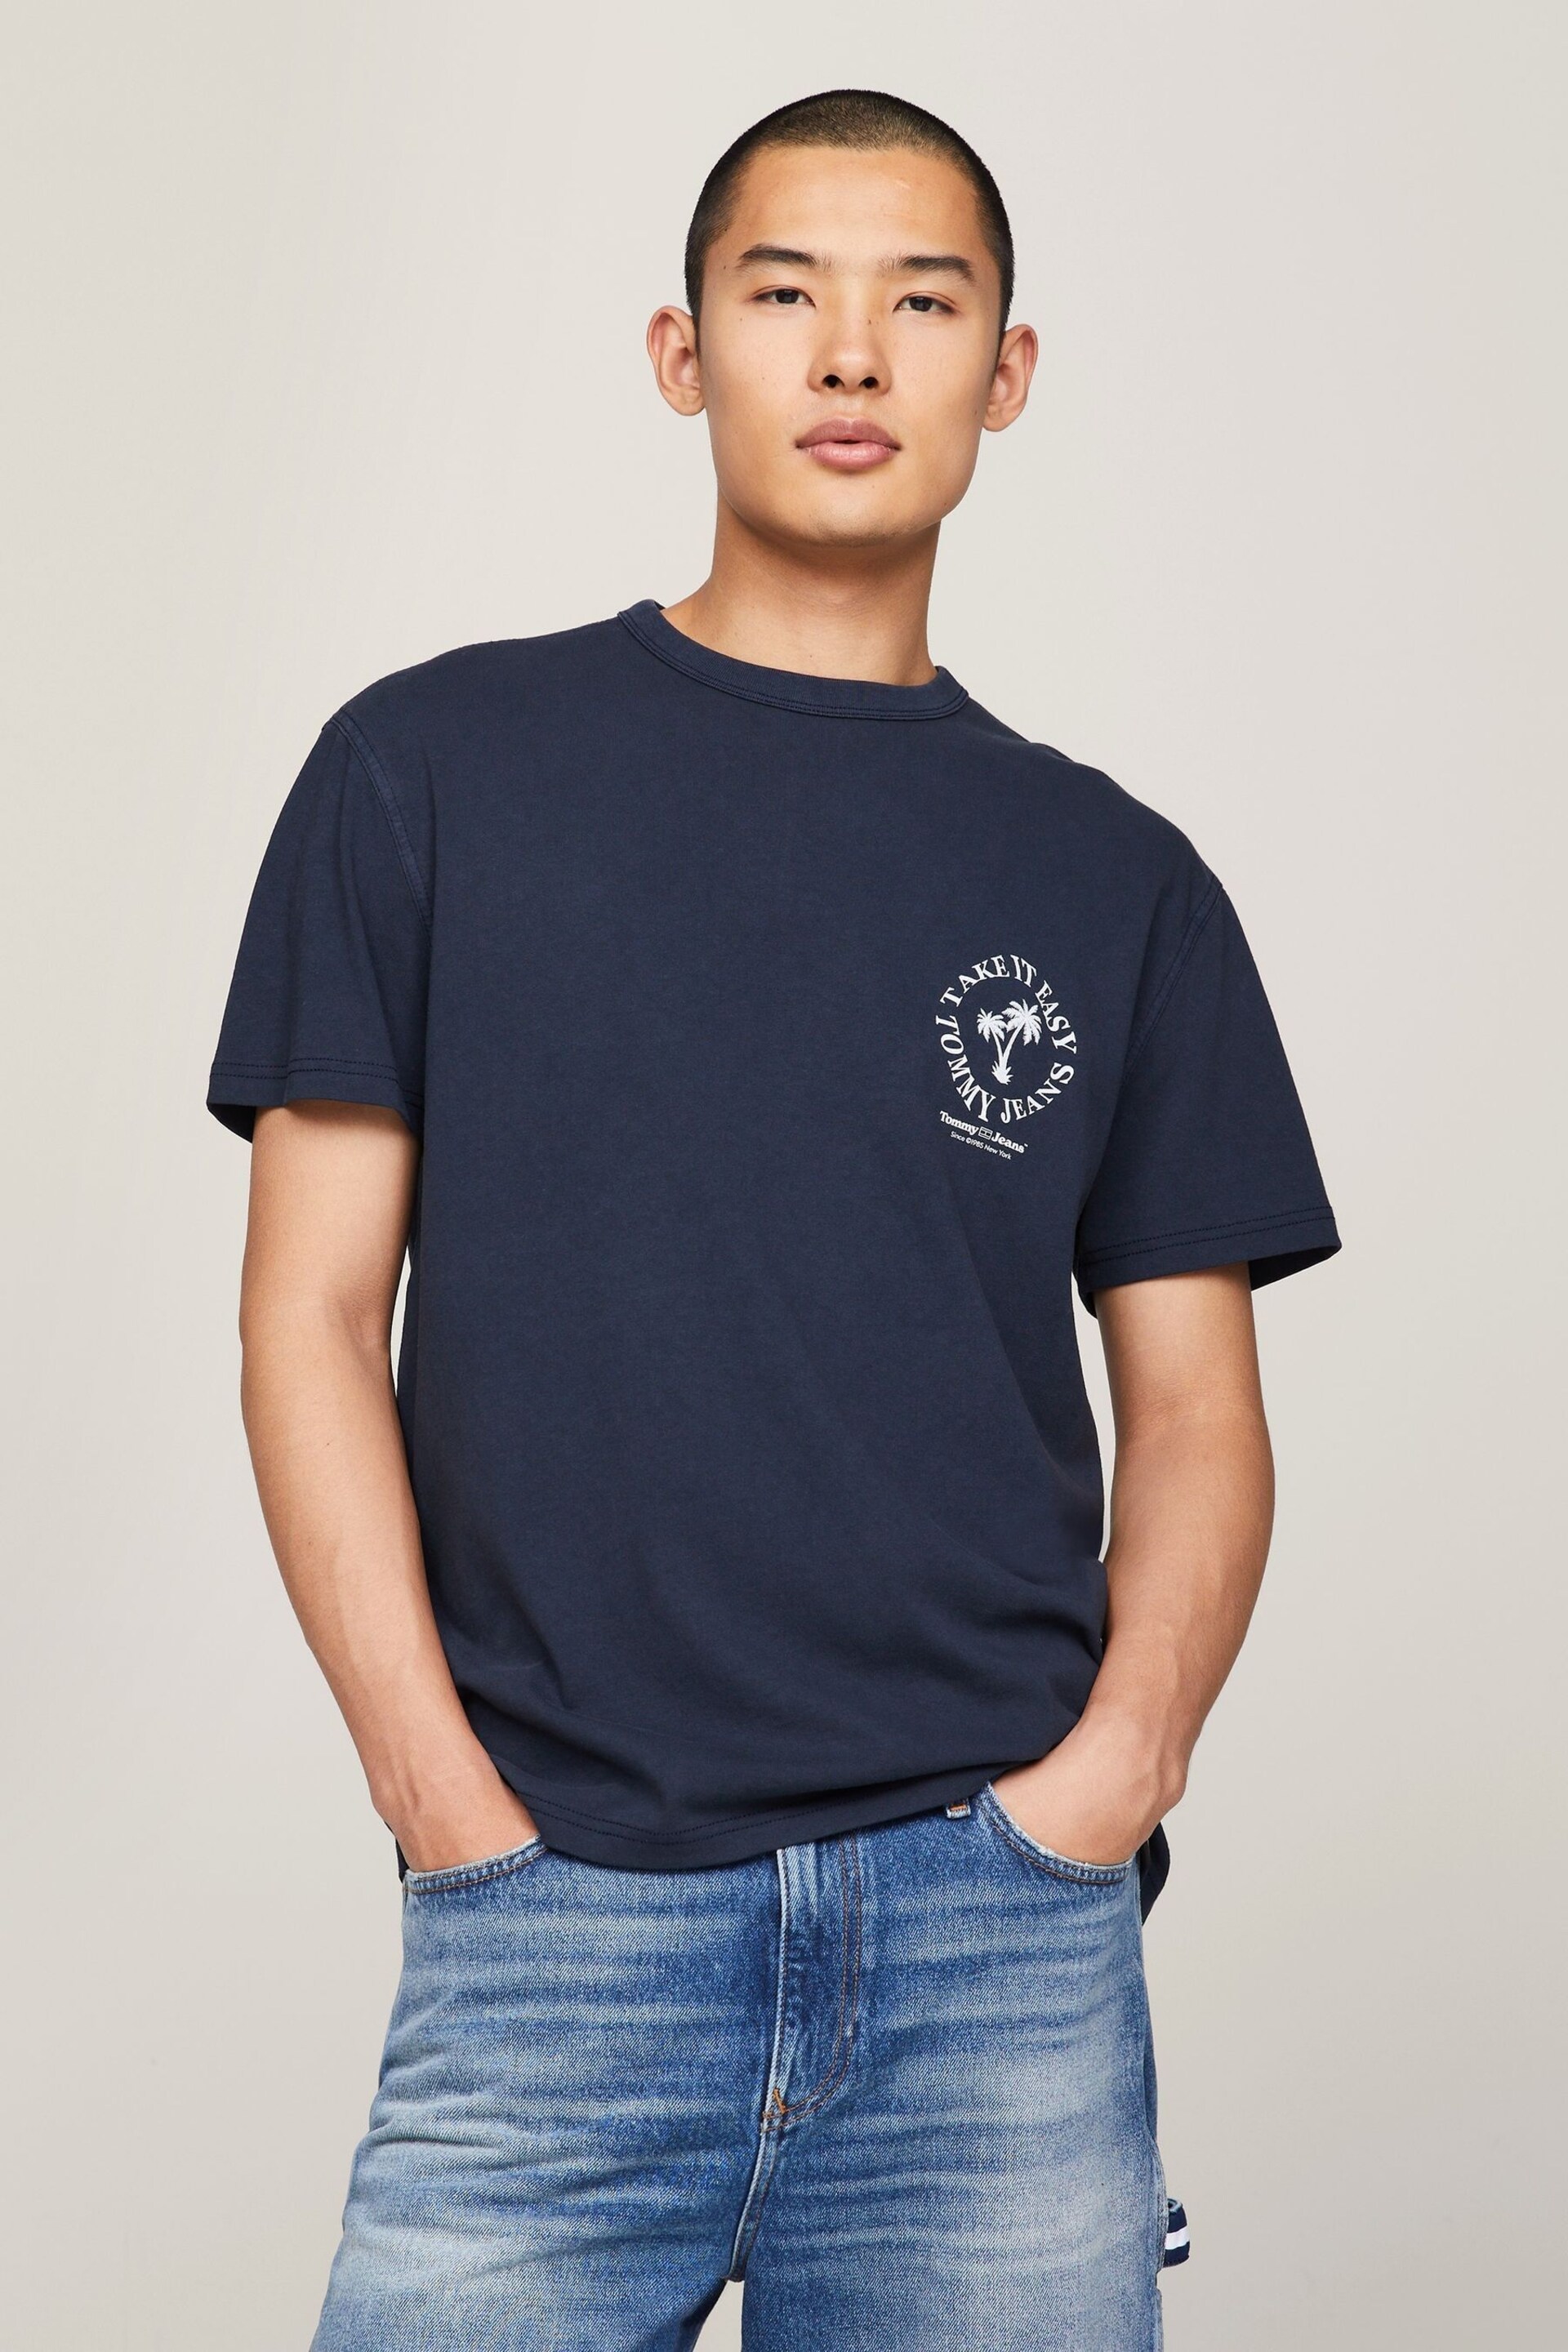 Tommy Jeans Blue Novelty Graphic T-Shirt - Image 1 of 6